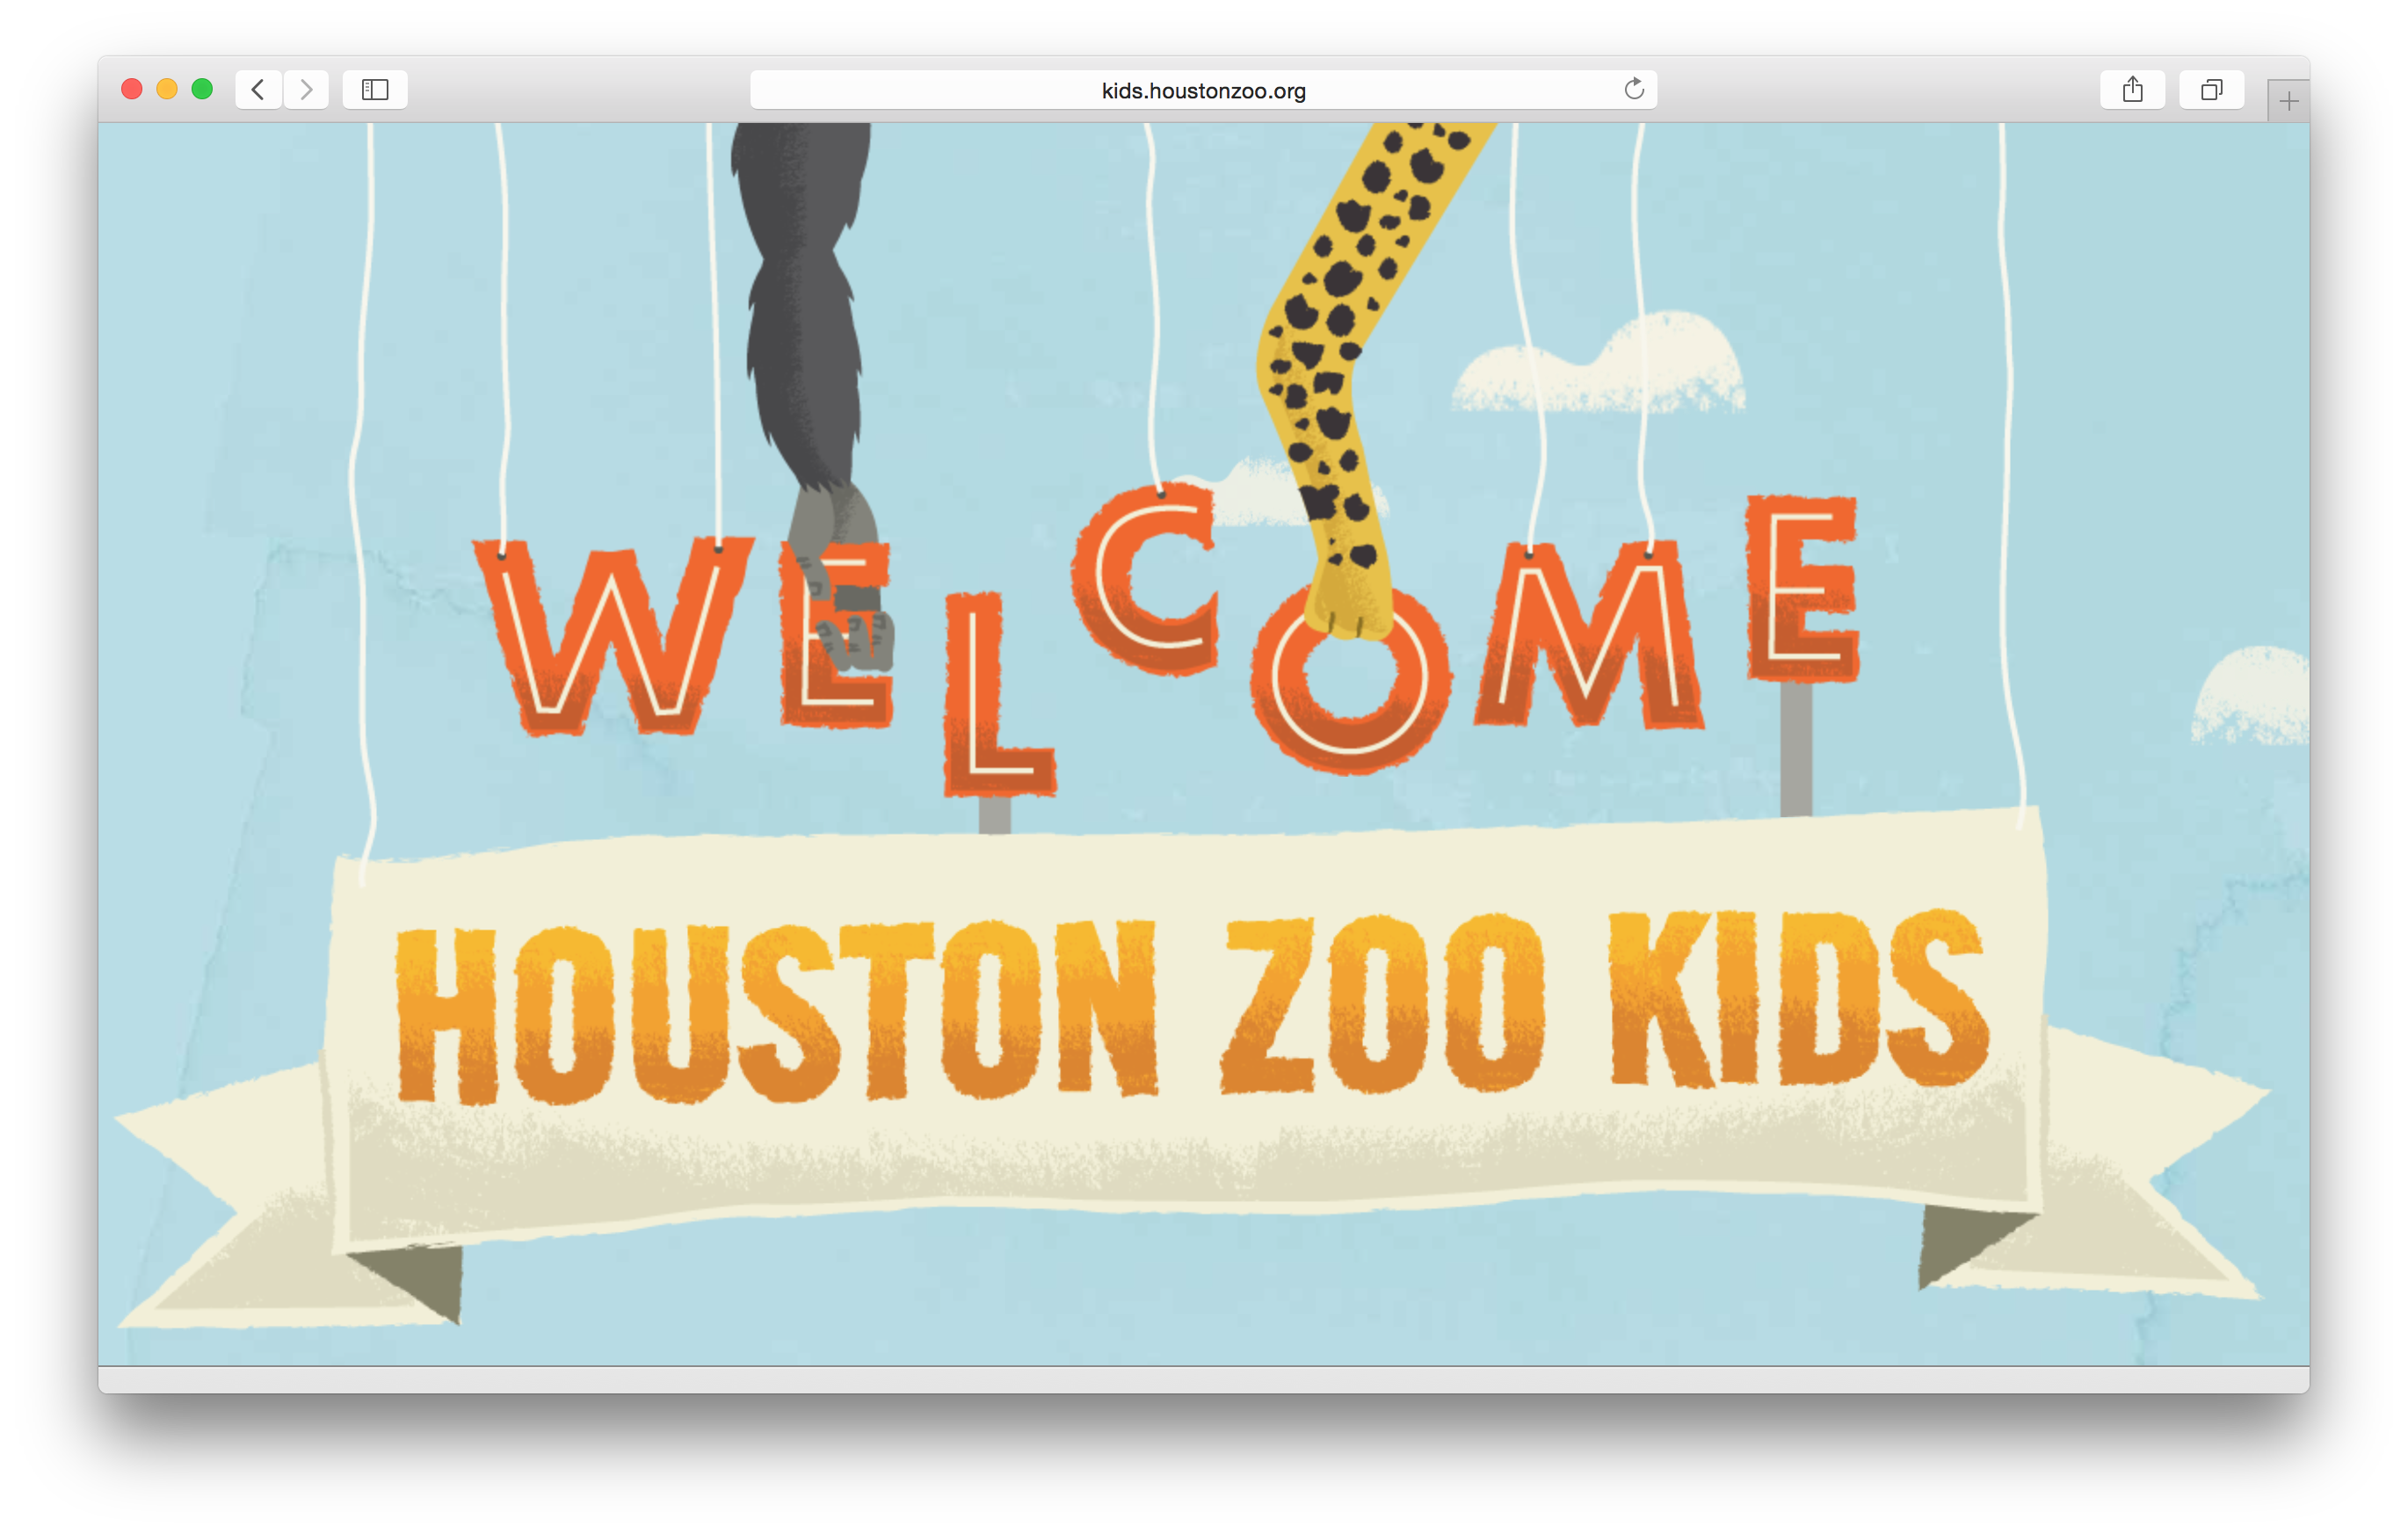 The welcome screen prepares kids for their new adventure.